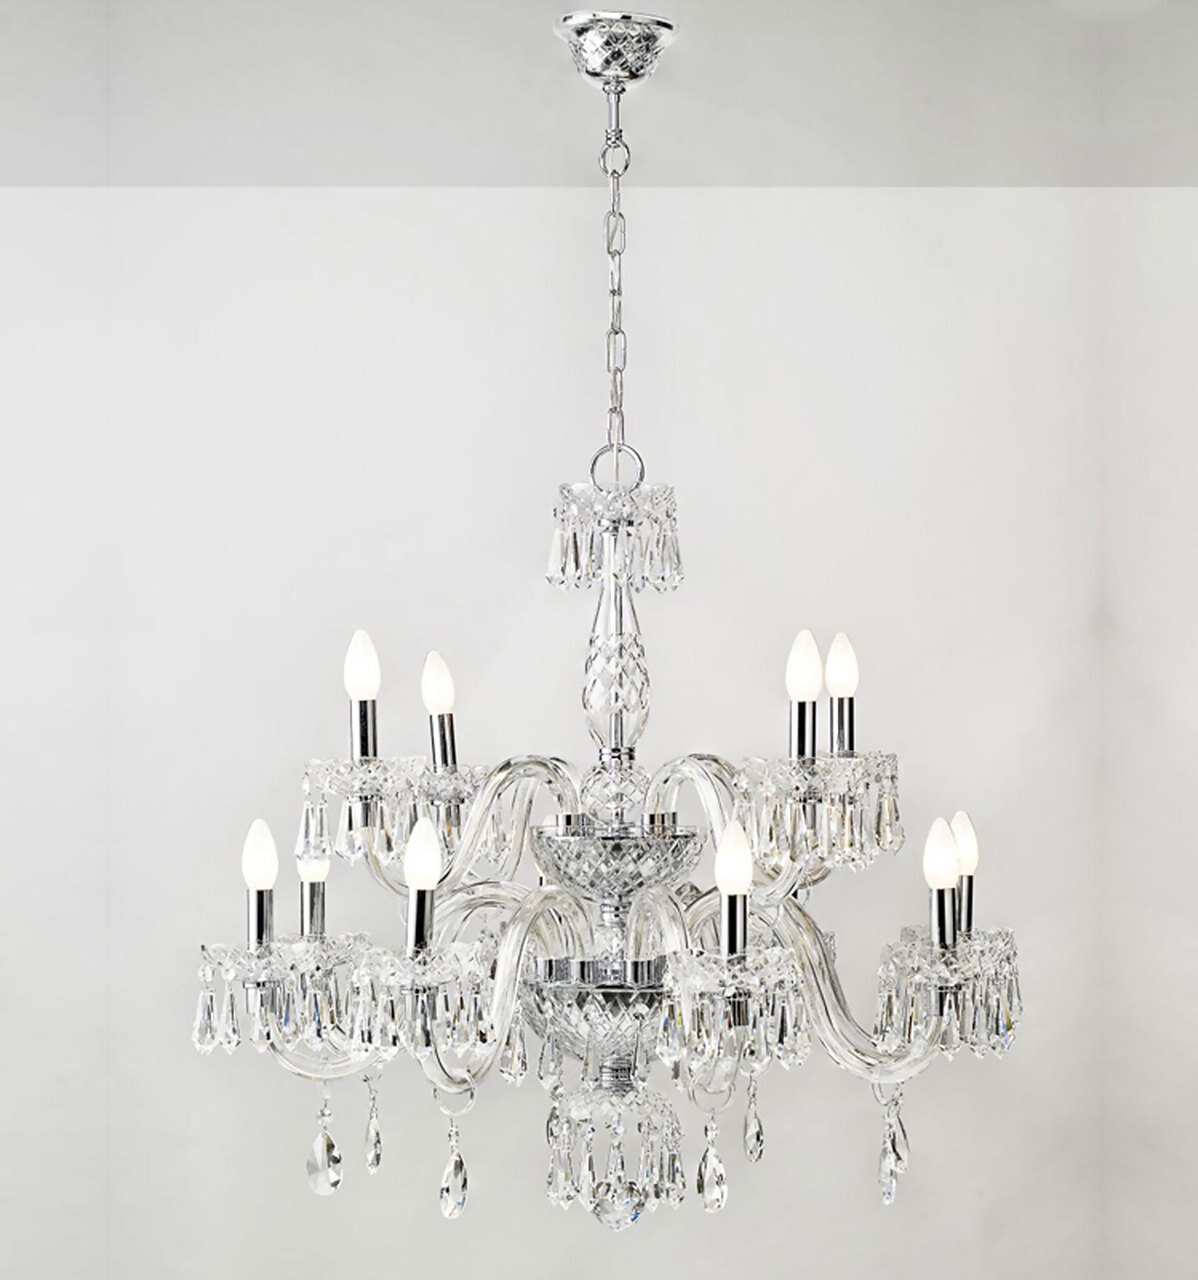 Vista Alegre Diamond Chandelier With 2 Levels And 12 Arms 48000366